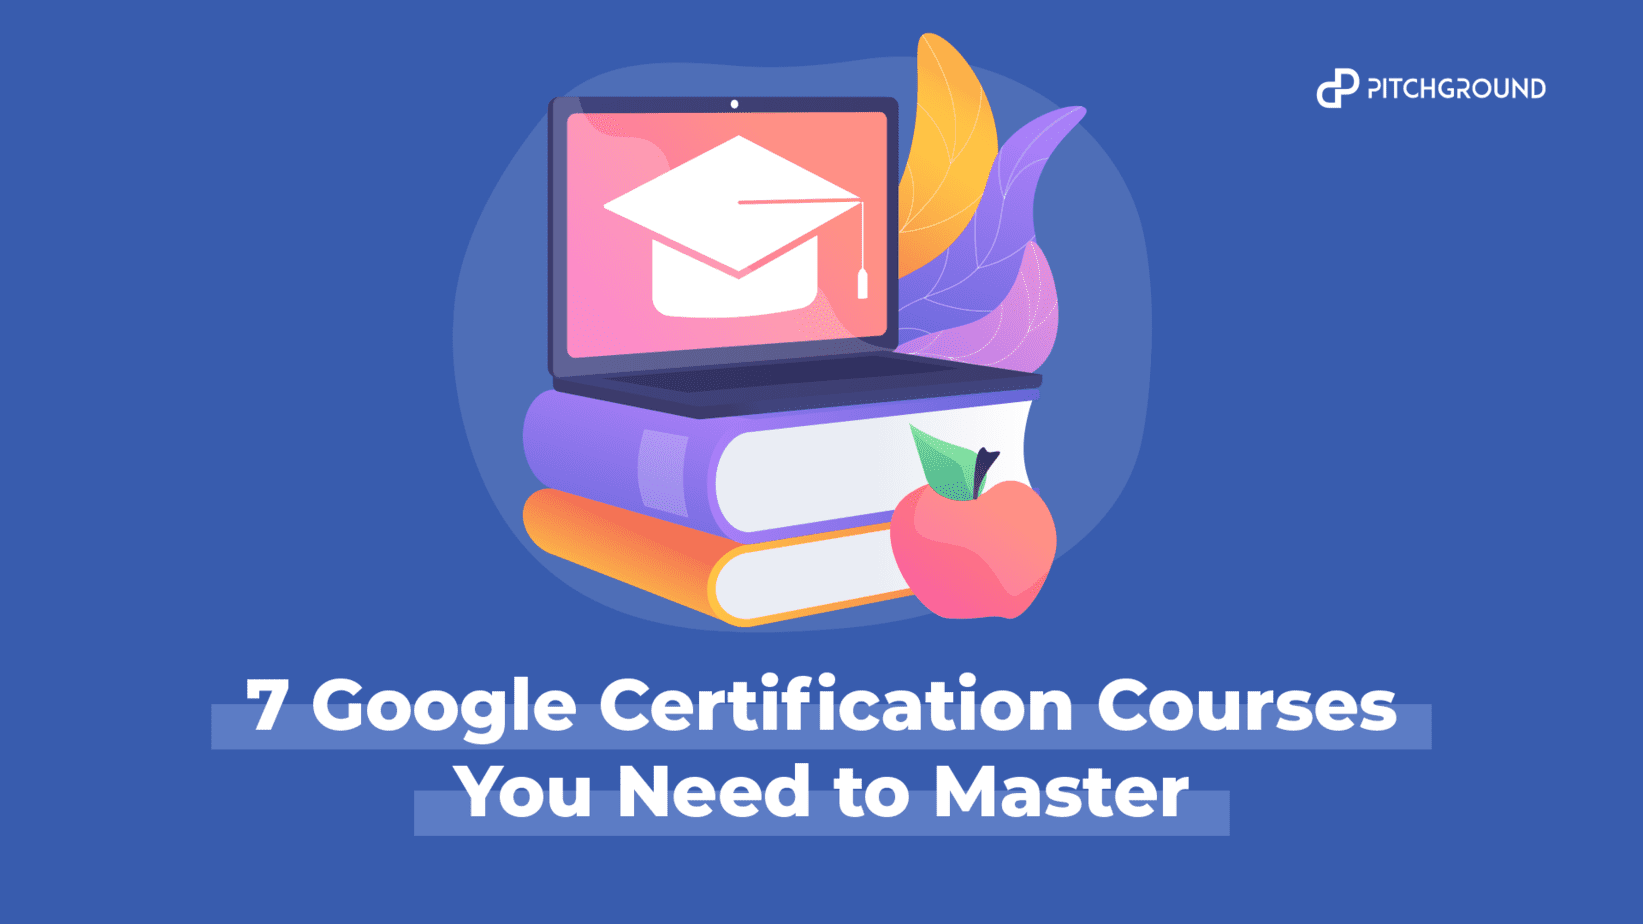 7 Google Certification Courses You Should Need to Master